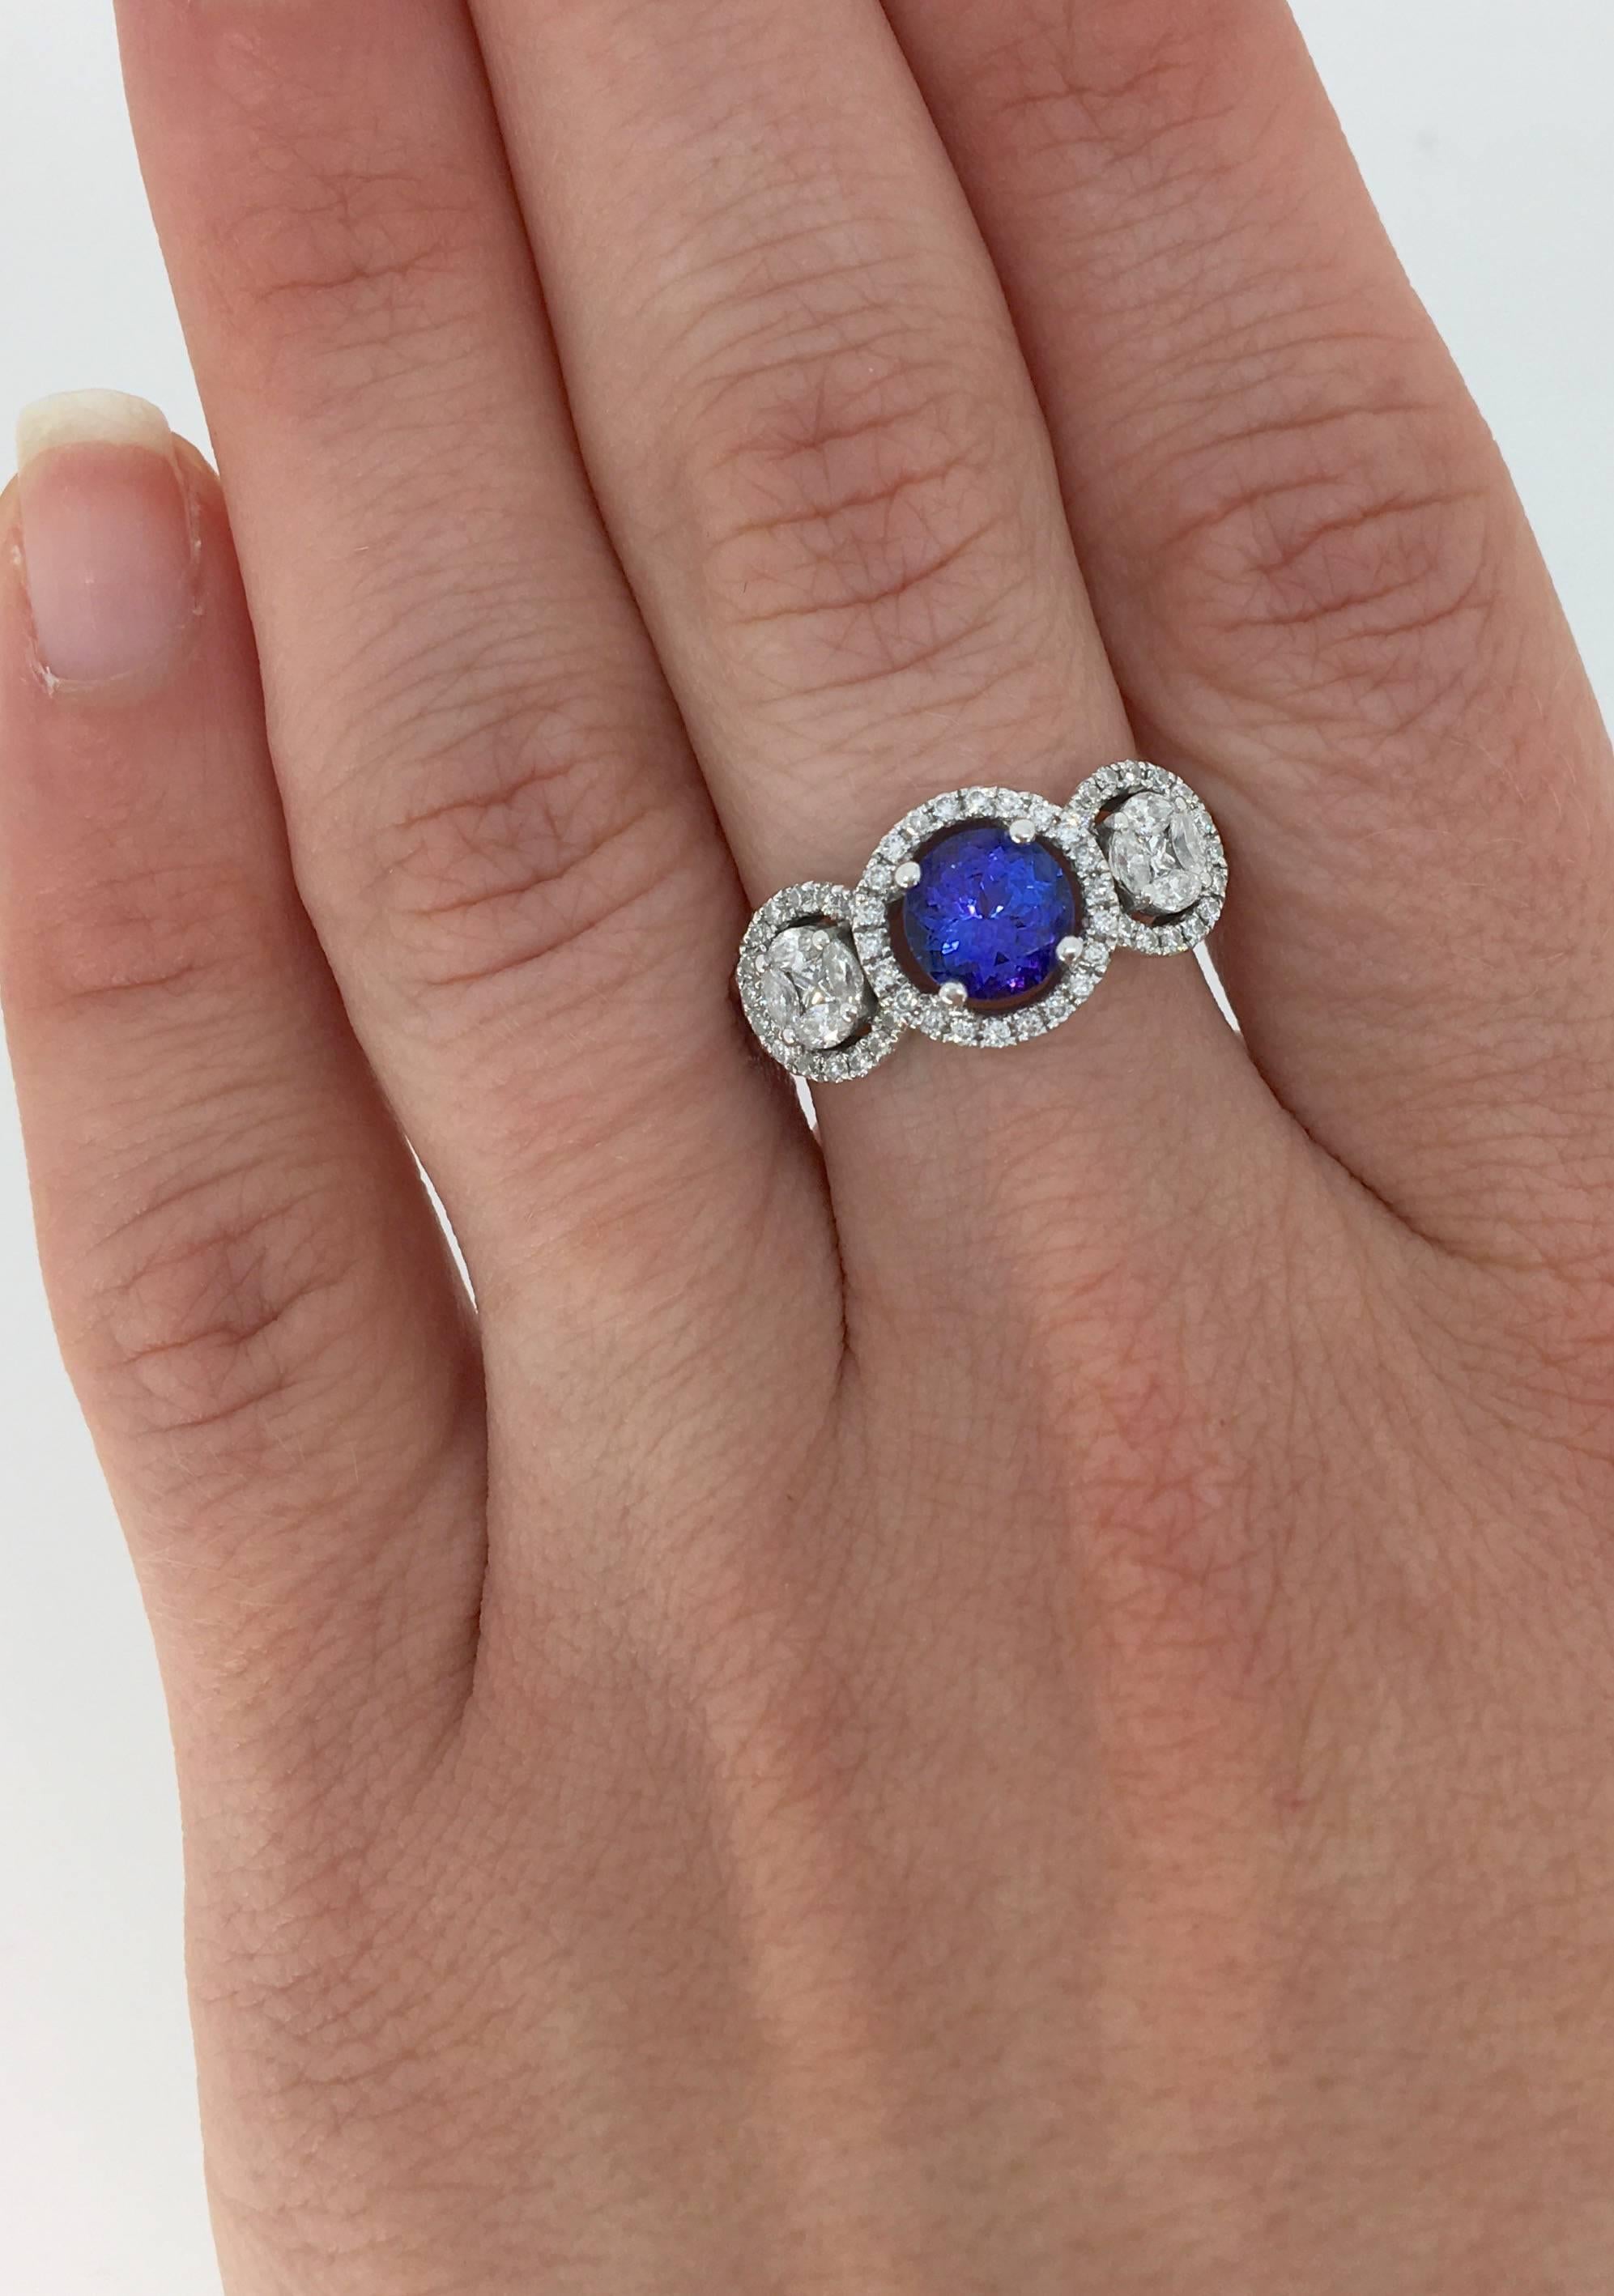 This timeless 14K White Gold Three stone halo Diamond and Tanzanite Ring Features a 6.4MM Round Tanzanite Stone.  The beautifully accented side stone halos contain two Princess cut Diamonds and 8 additional surrounding Marquise cut Diamonds. The